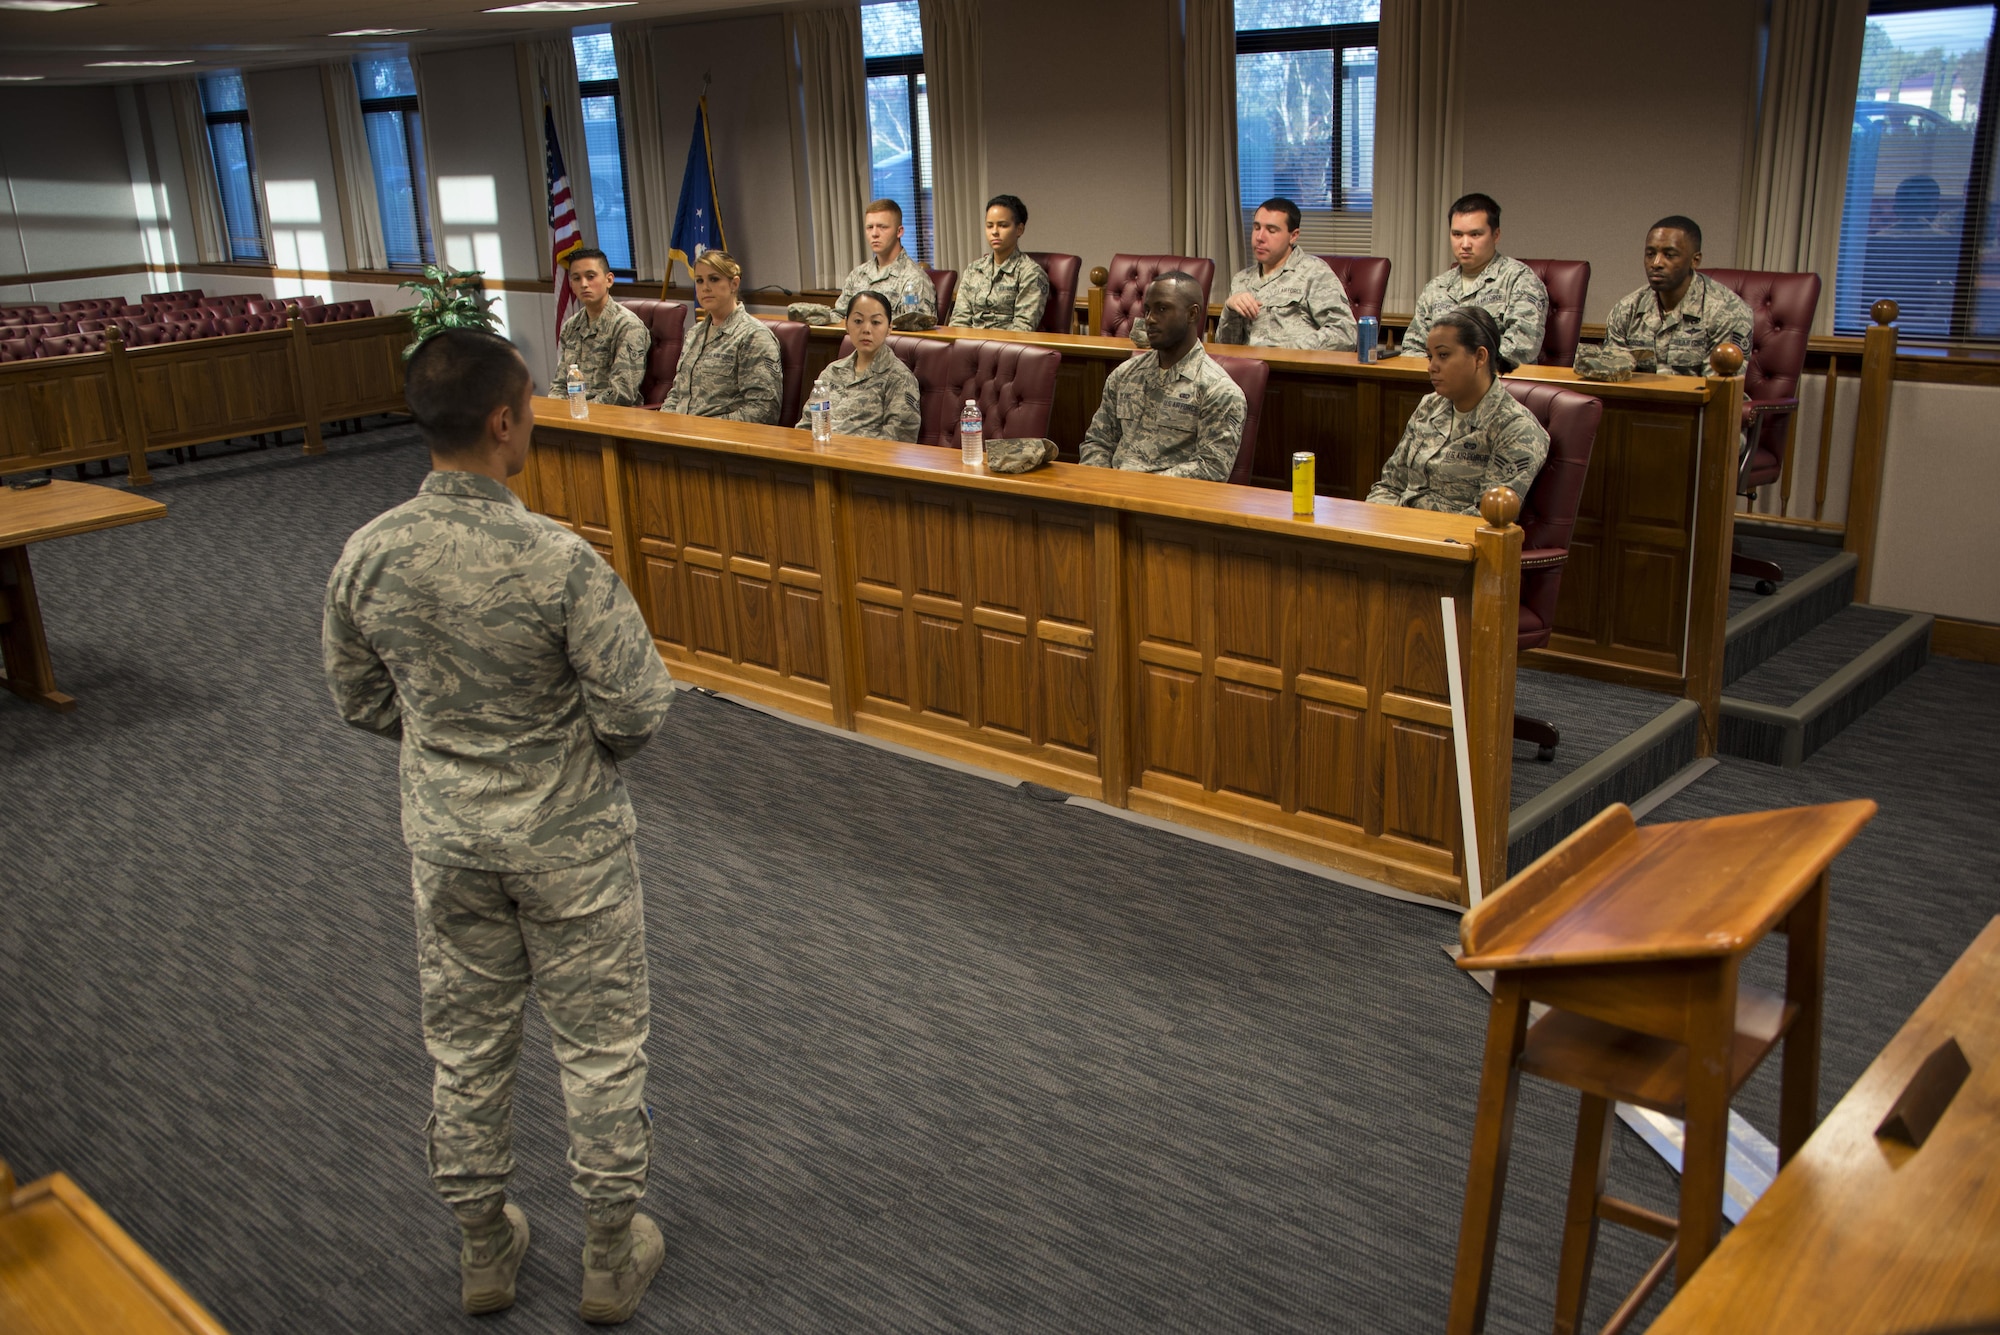 Capt. Joseph Cachuela, 60th Air Mobility Wing Legal Office attorney, front, discusses the different elements involved in a court-martial proceeding with Airmen participating in the True North program at Travis Air Force Base, Calif., Sept. 15, 2016. The True North program showcases the full spectrum of the military judicial process including incarceration. (U.S. Air Force photo by Staff Sgt. Charles Rivezzo)